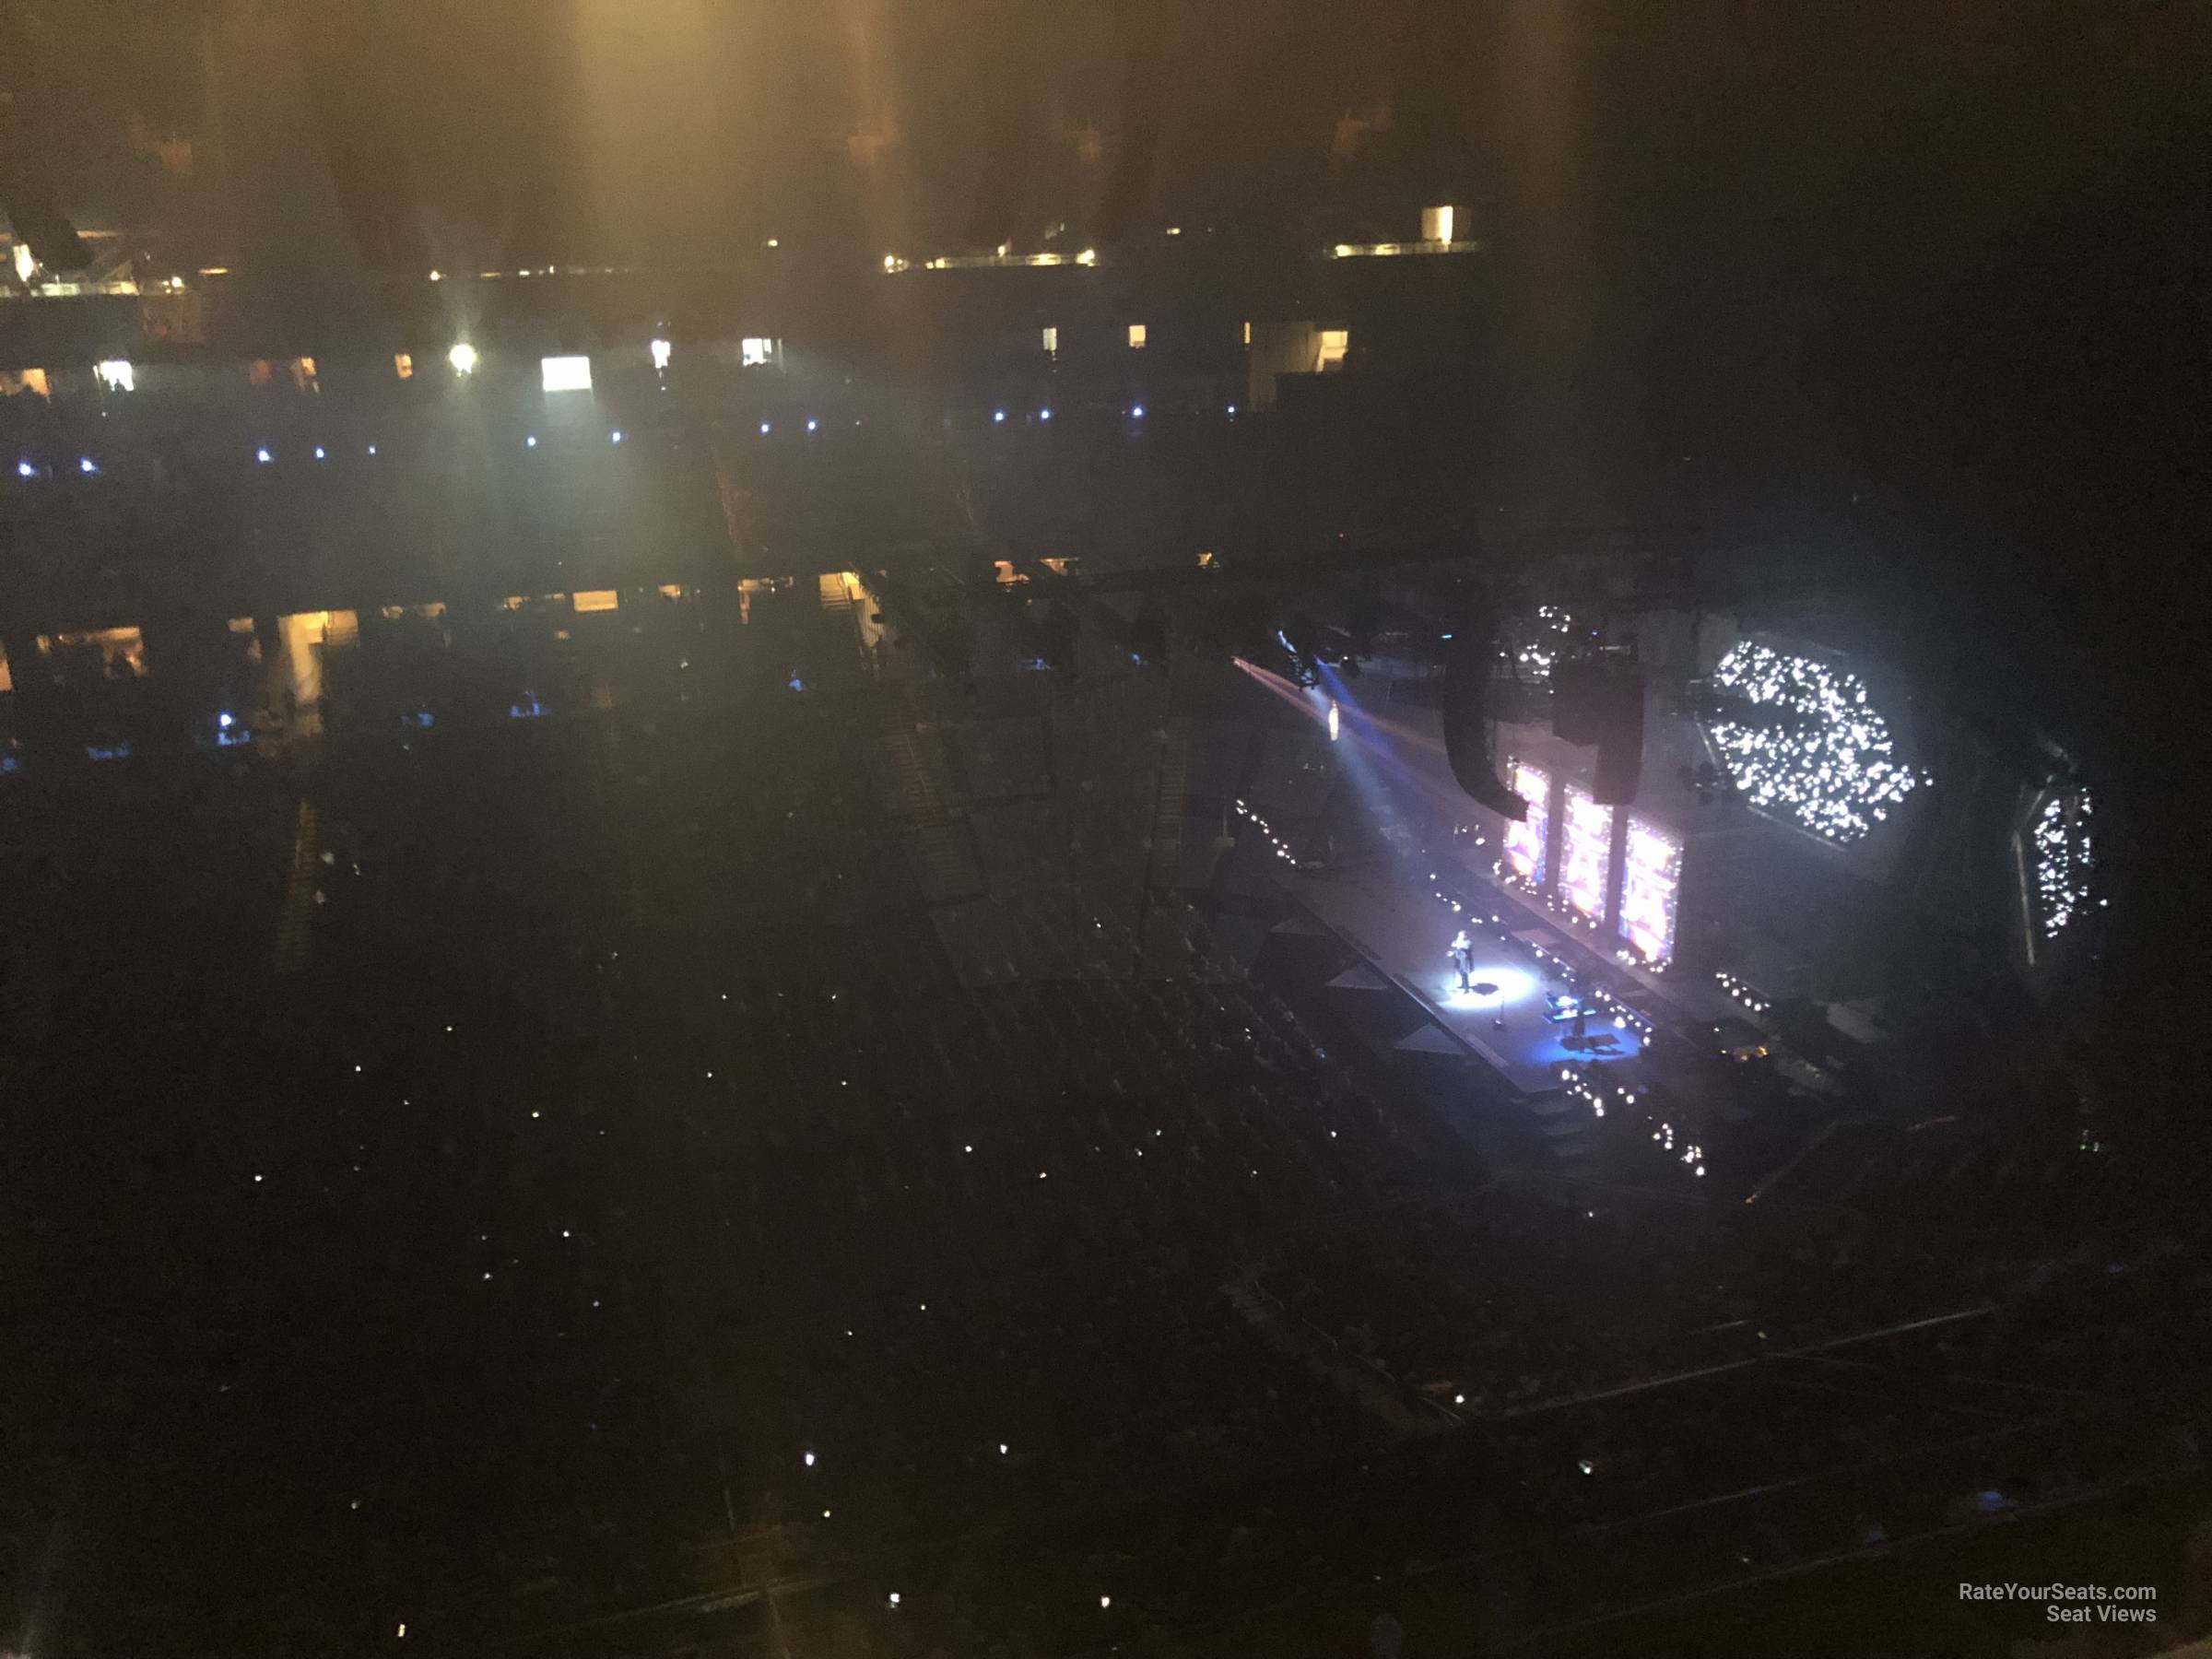 section 209, row 3 seat view  for concert - amway center